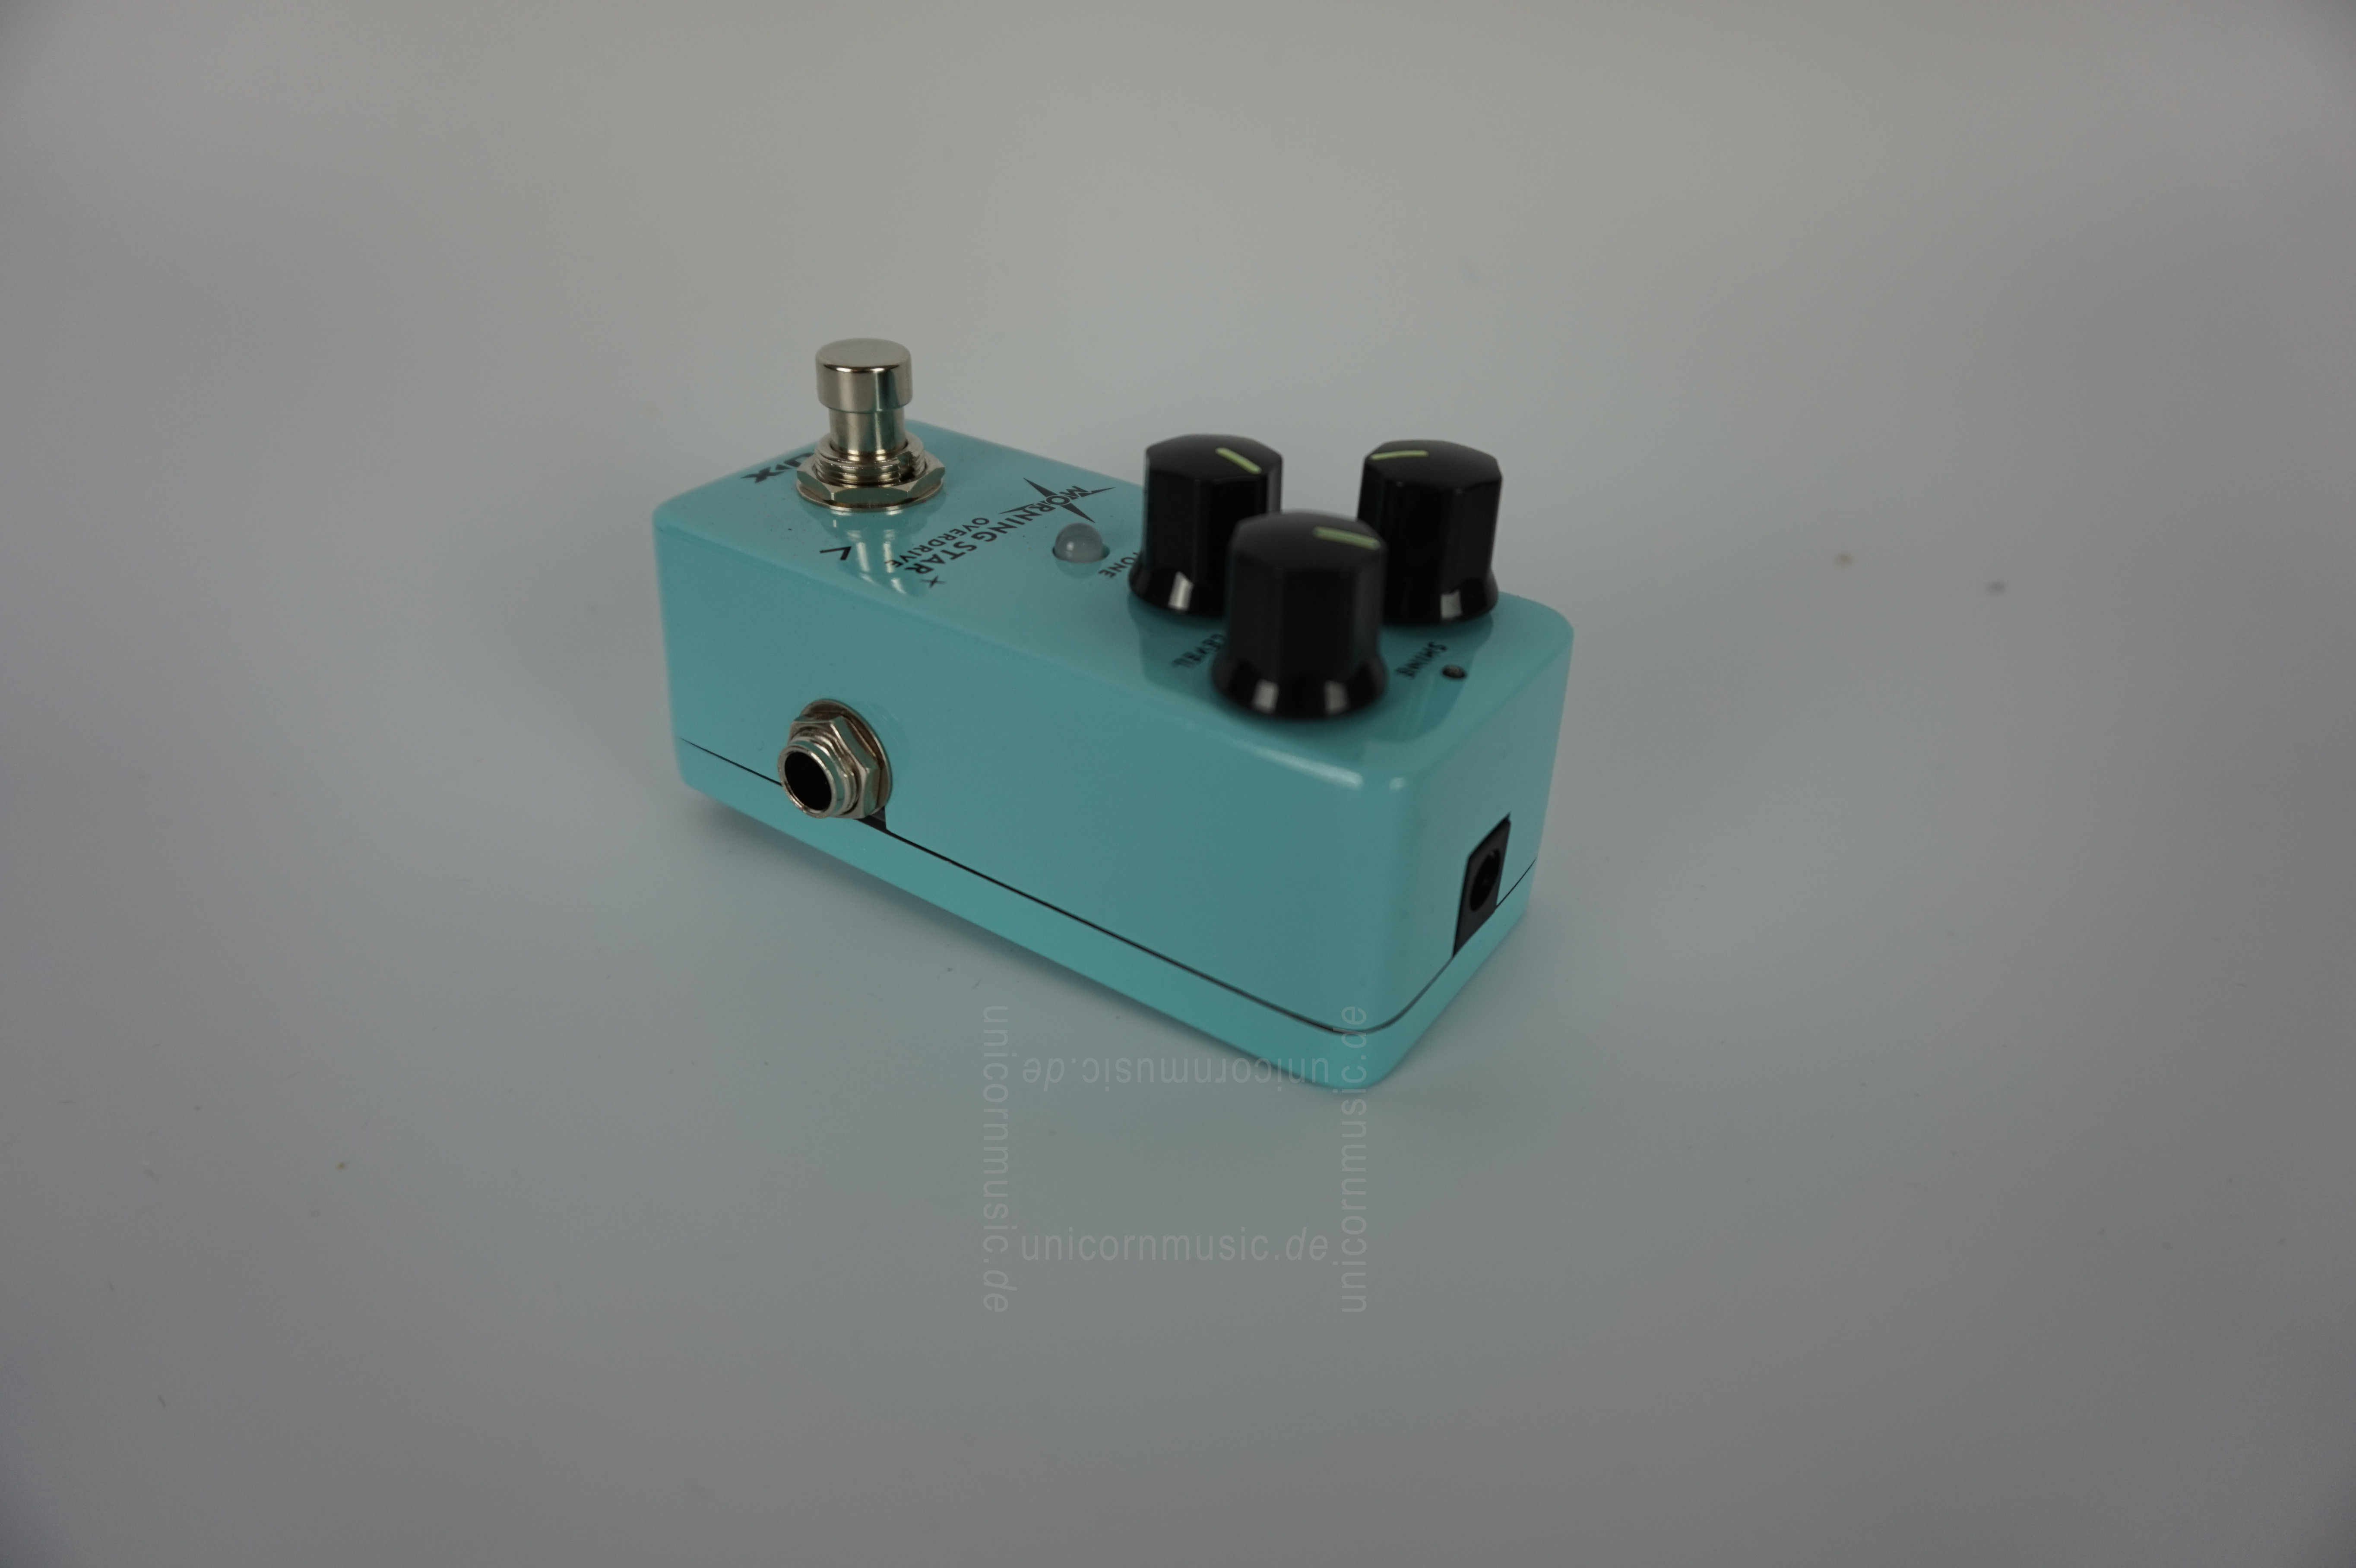 to article description / price NUX Morningstar Overdrive